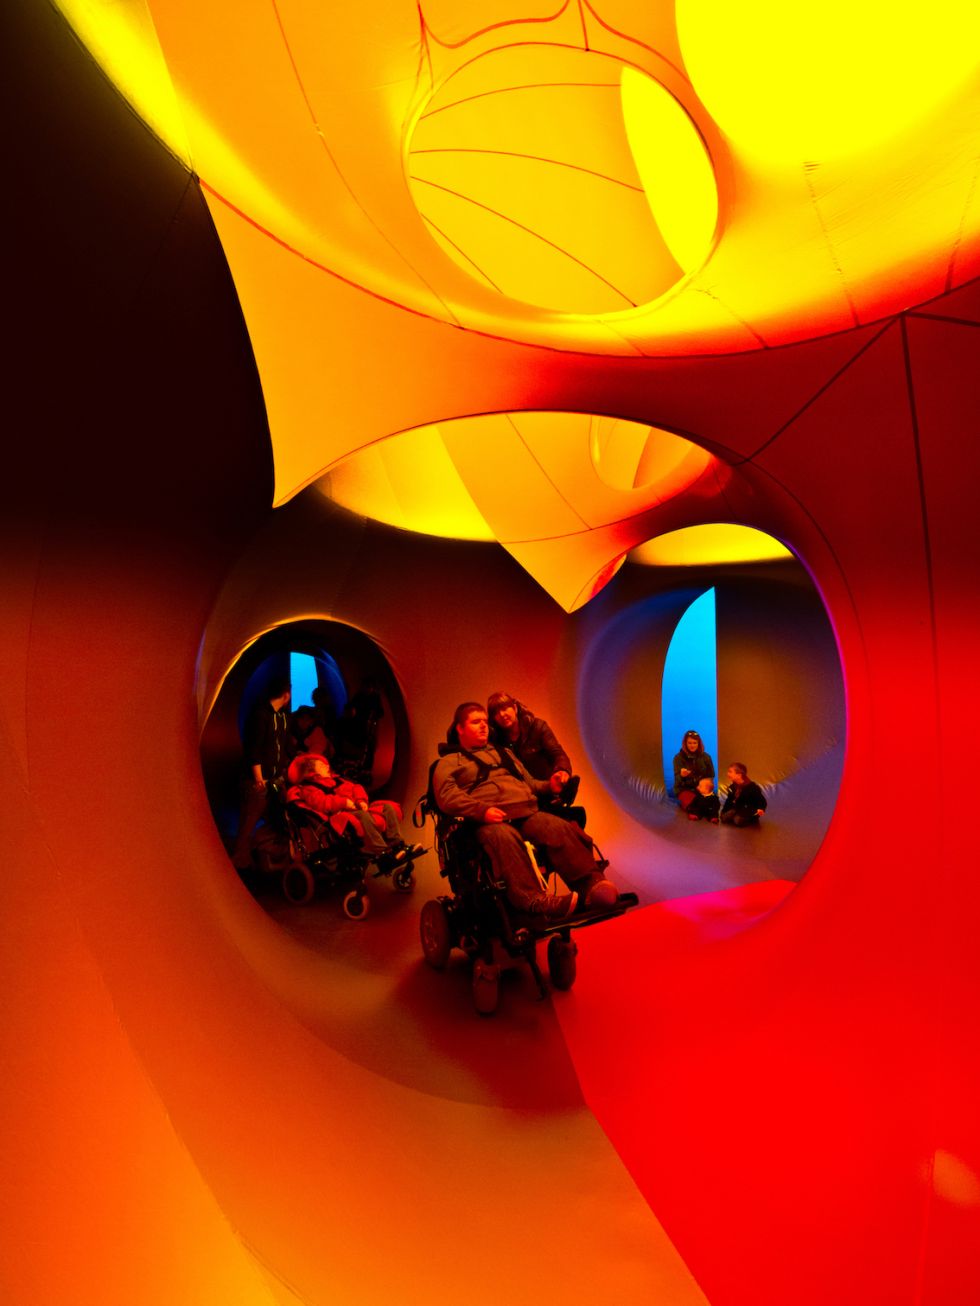 Dodecalis Luminarium is wheelchair accessible.